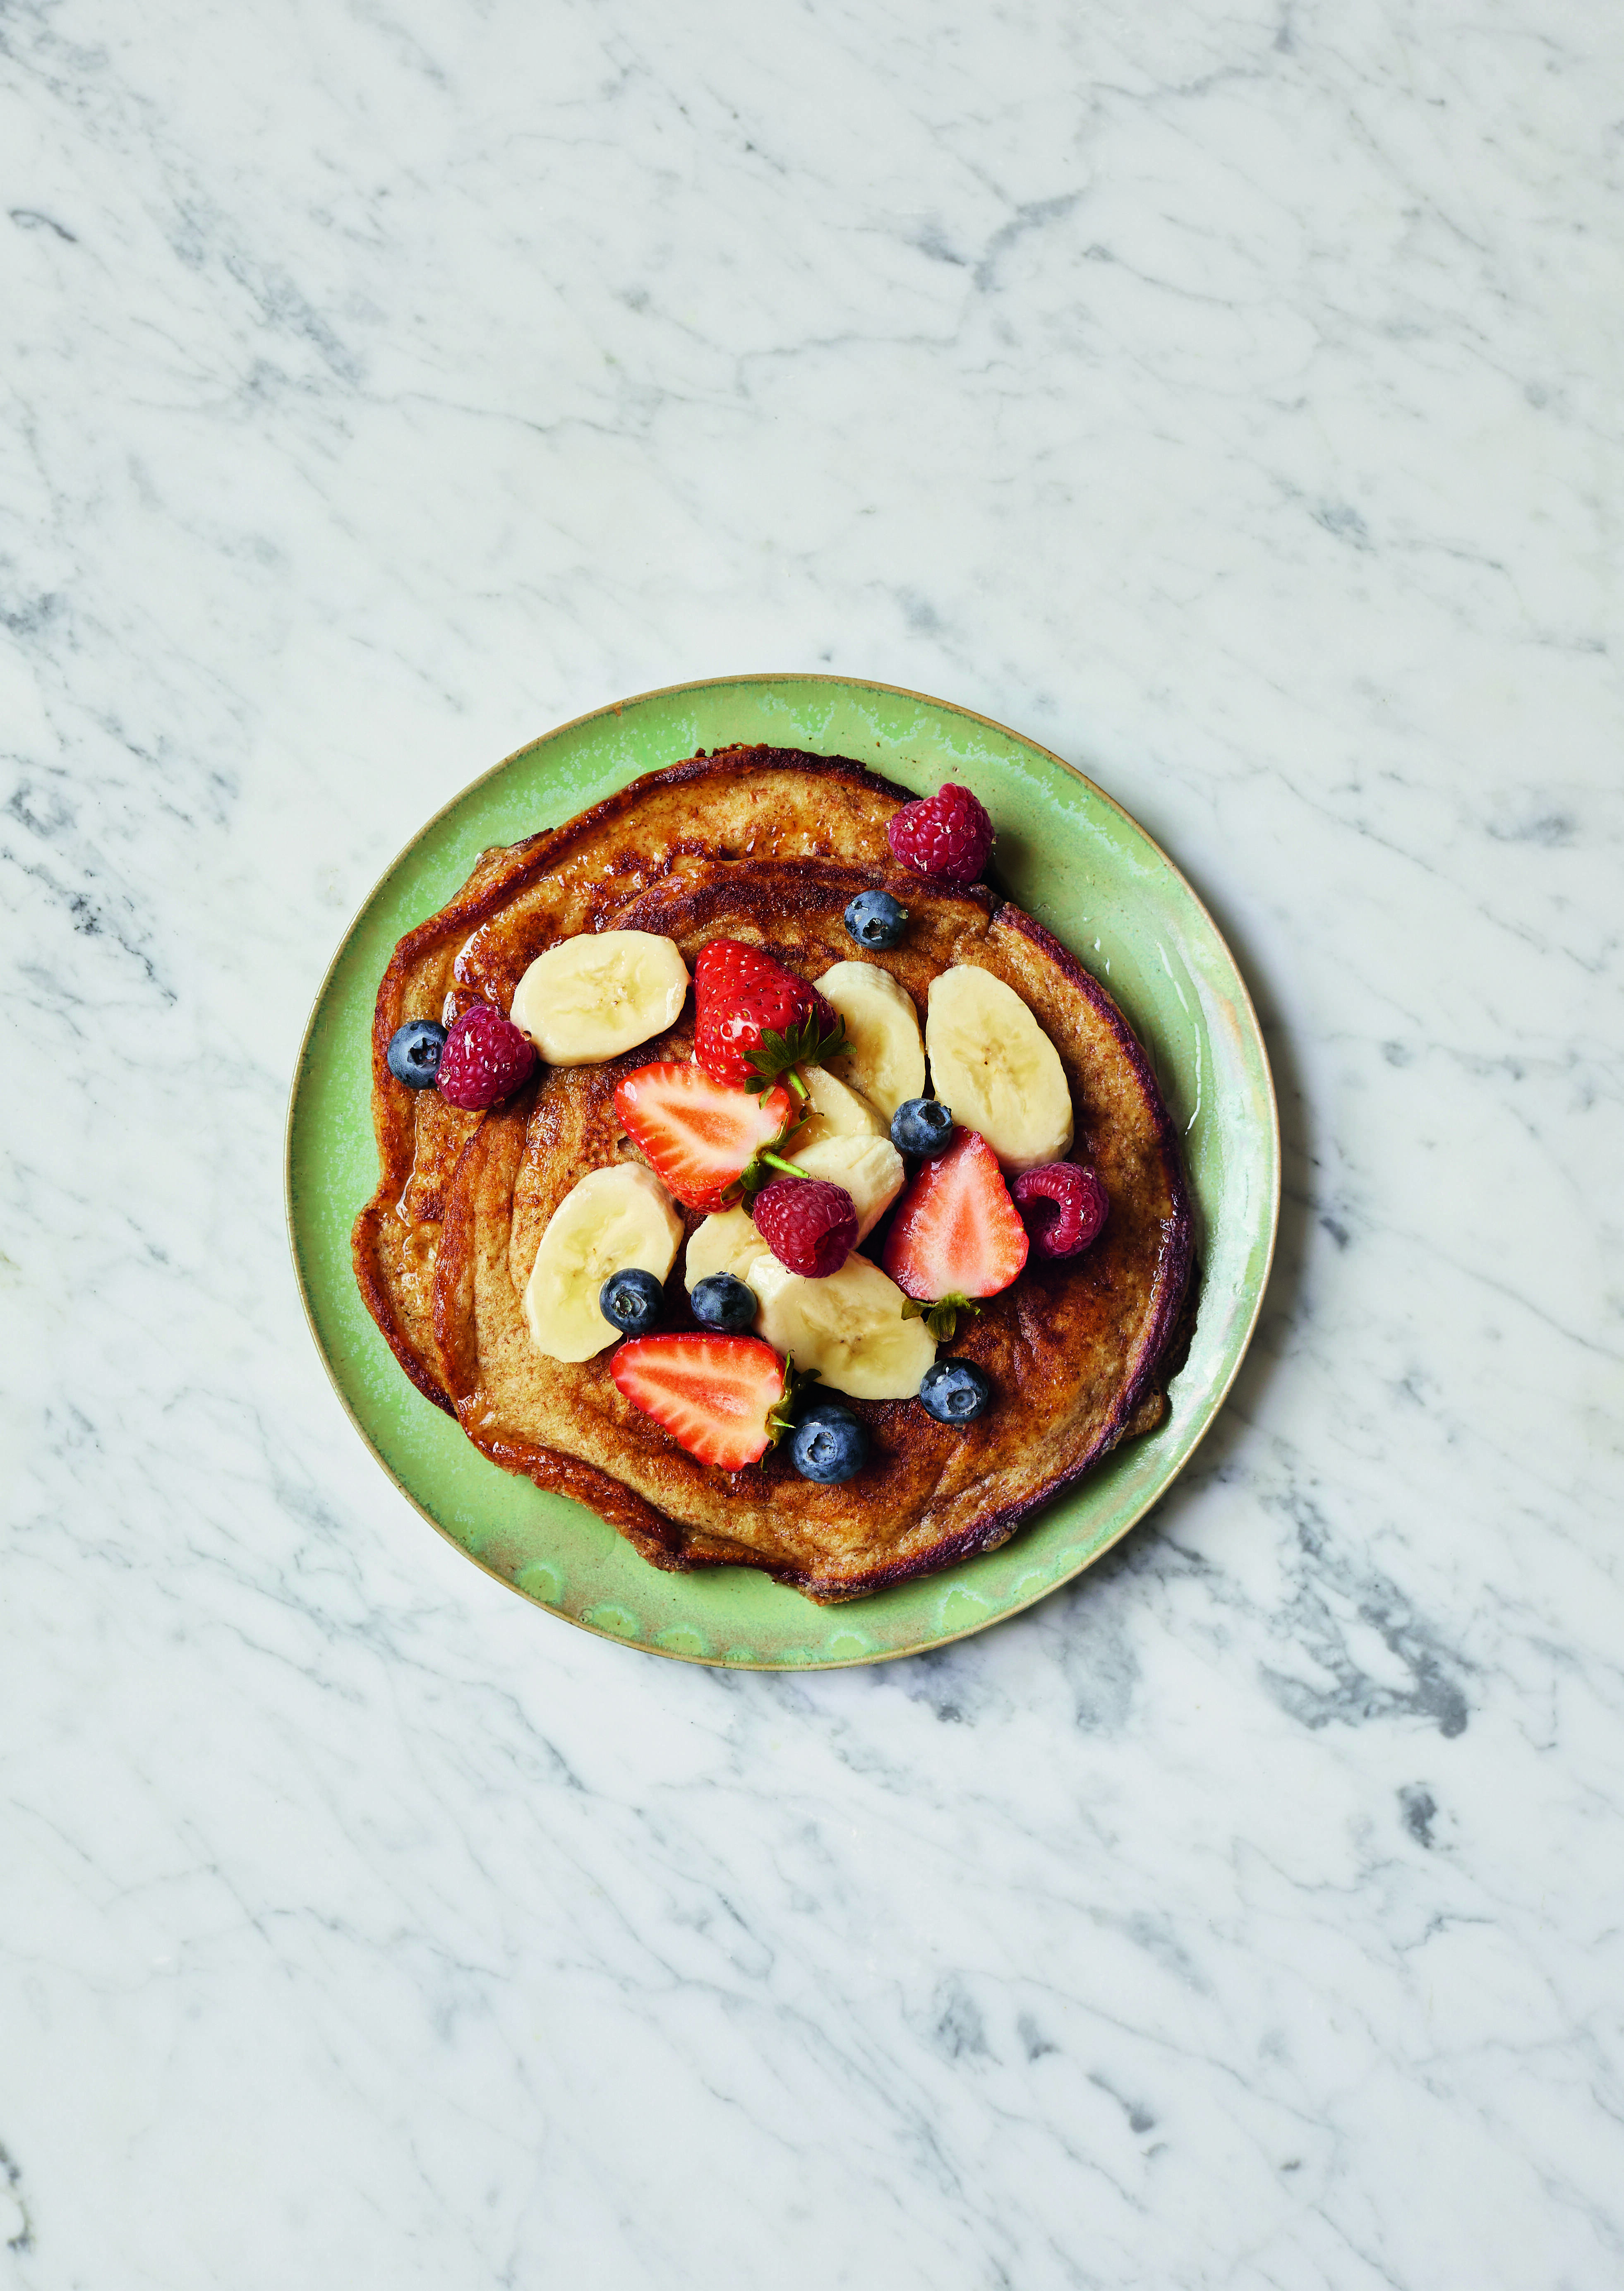 Whole-wheat pancakes, from The Wellness Principles